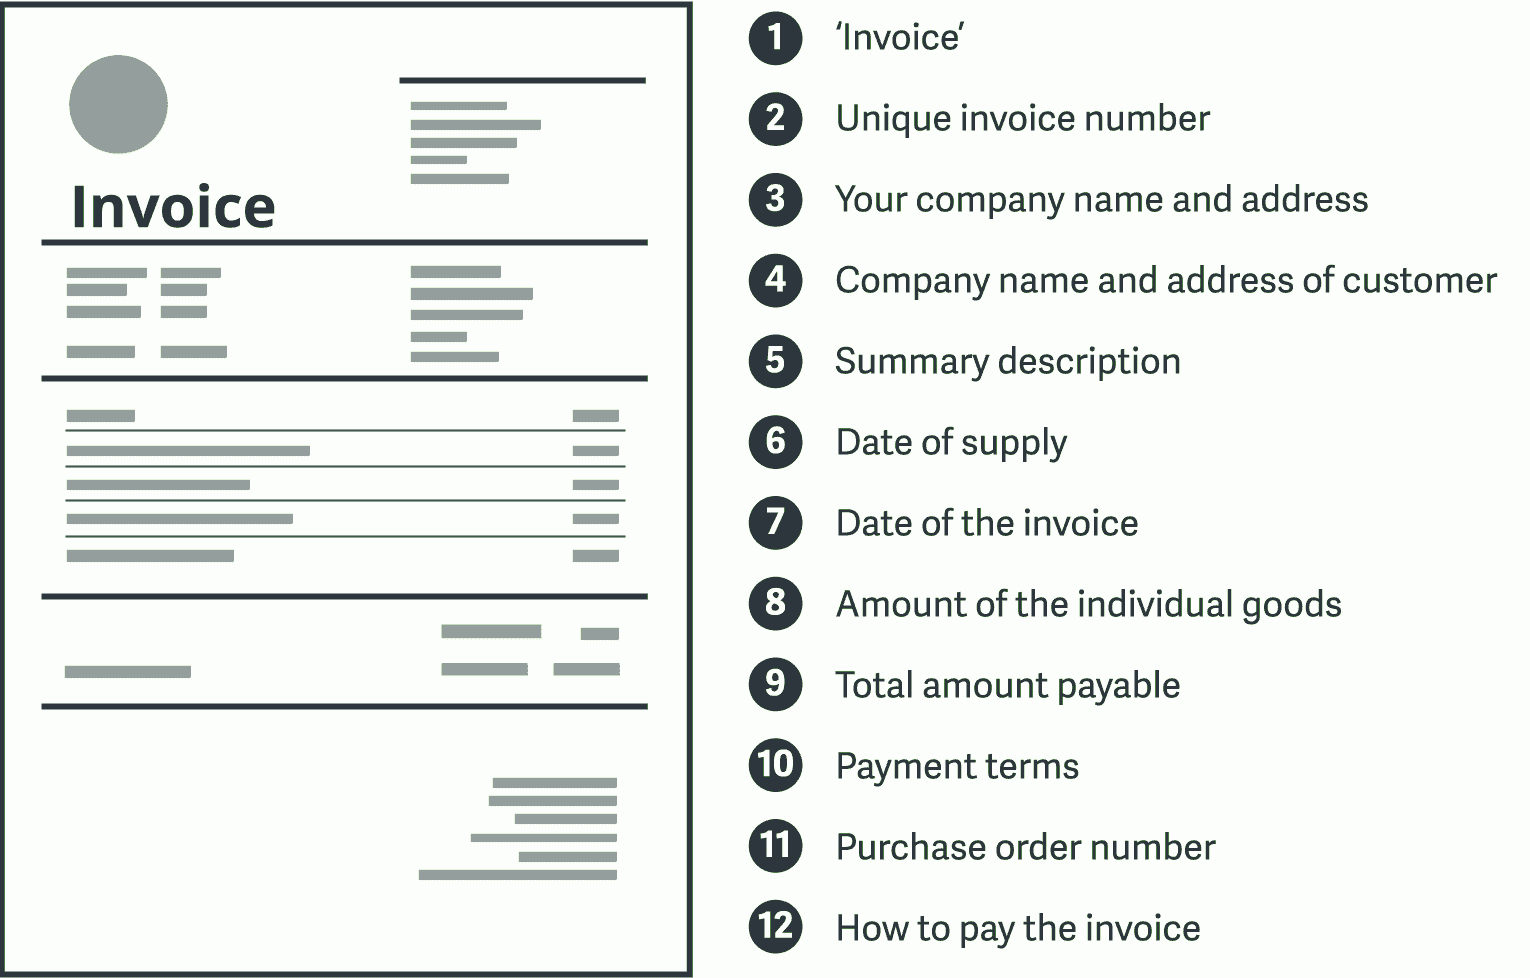 Invoice Cheat Sheet: What You Need To Include On Your Regarding Hmrc Invoice Template